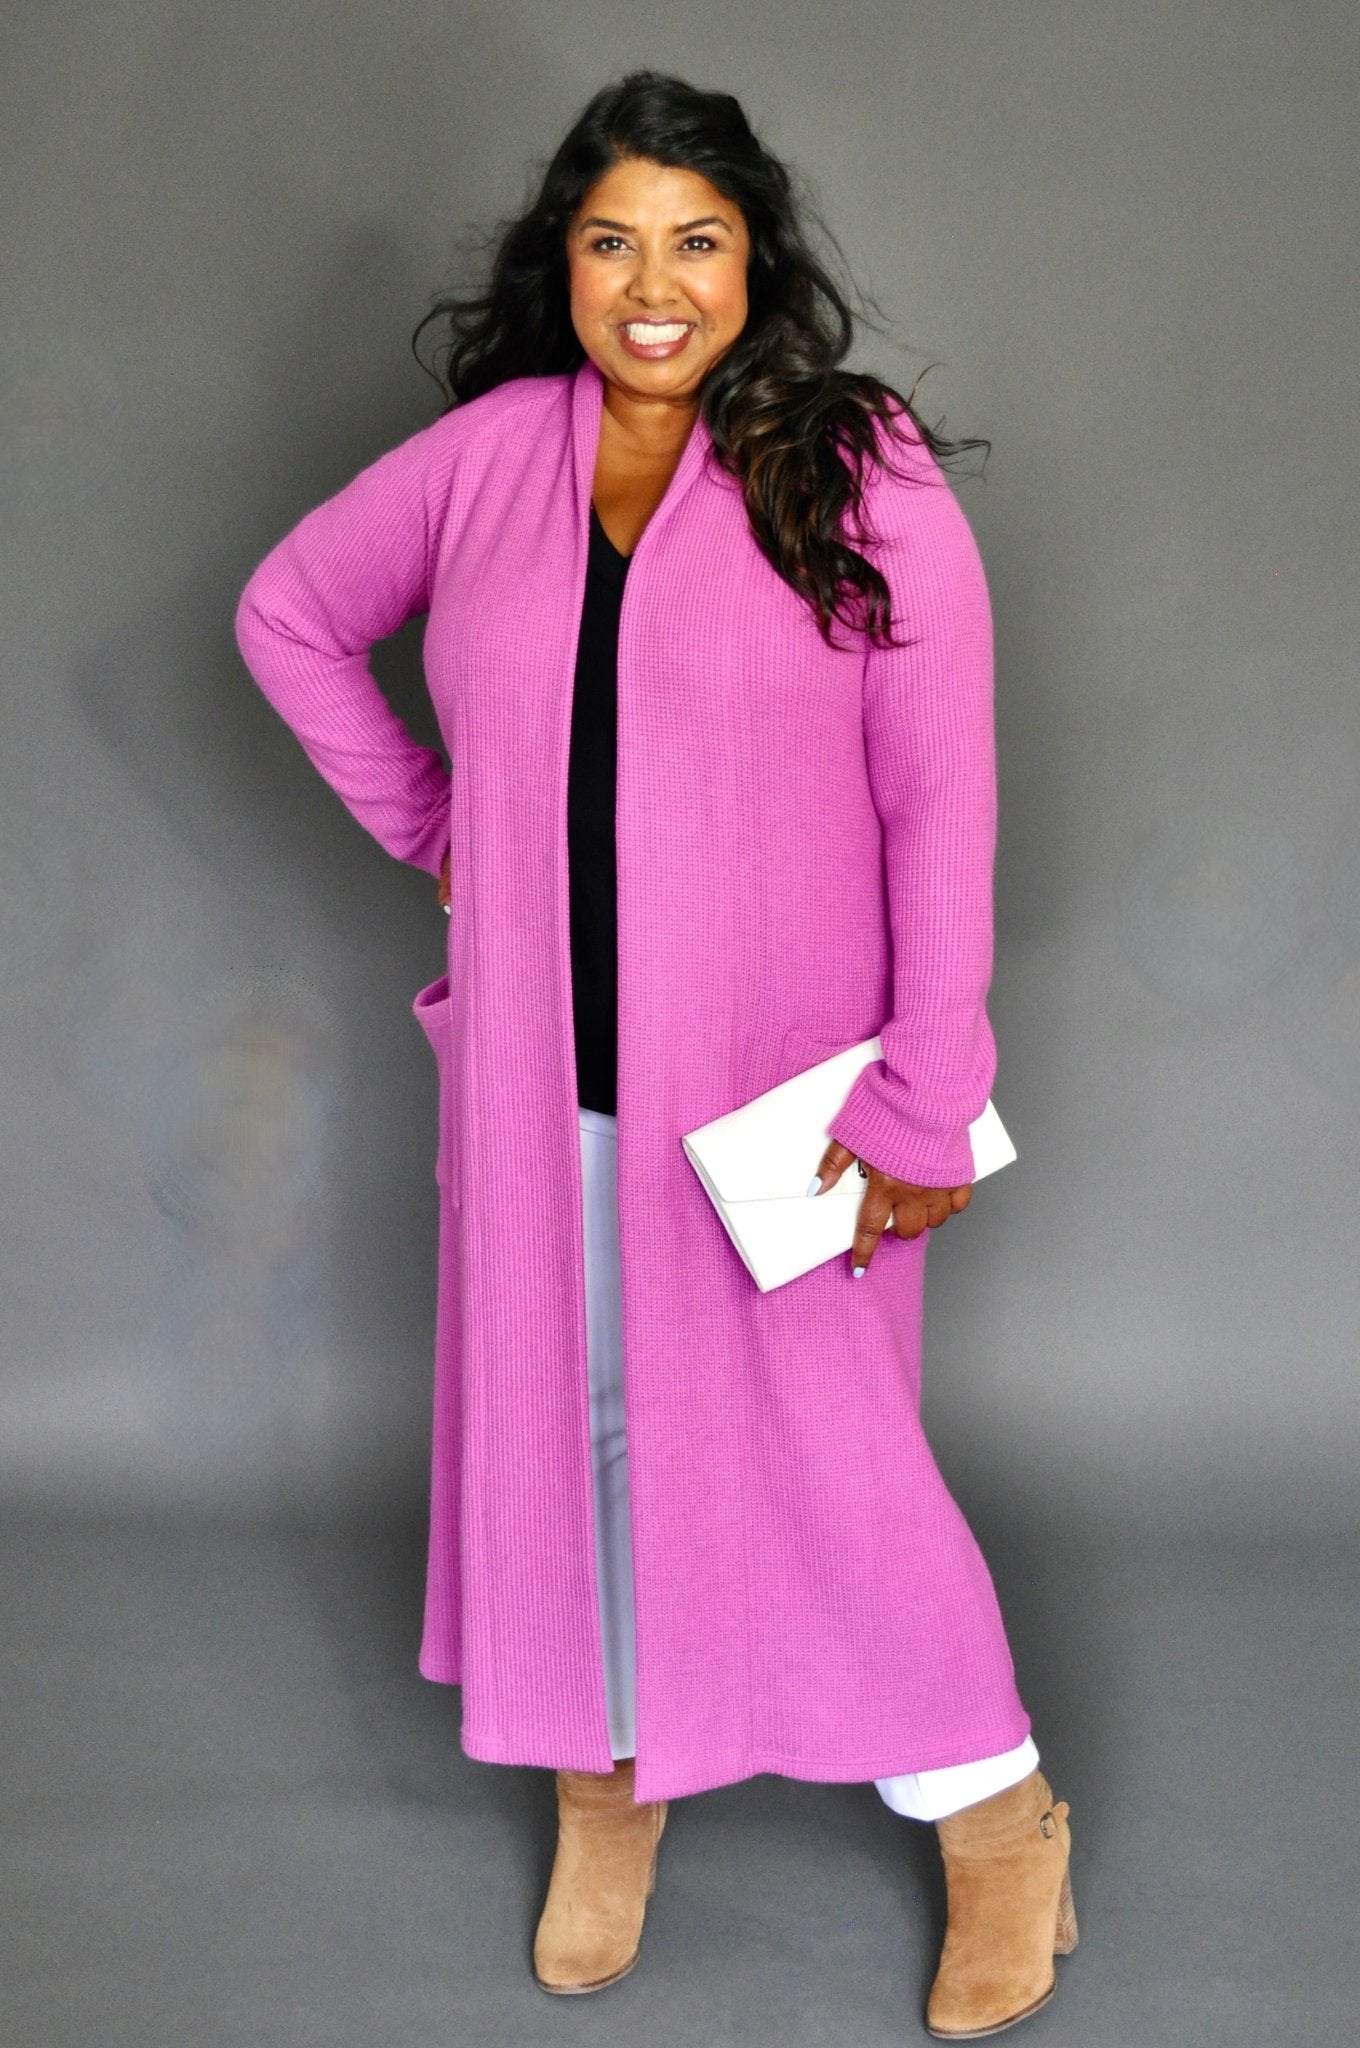 Pink Duster Cardigan